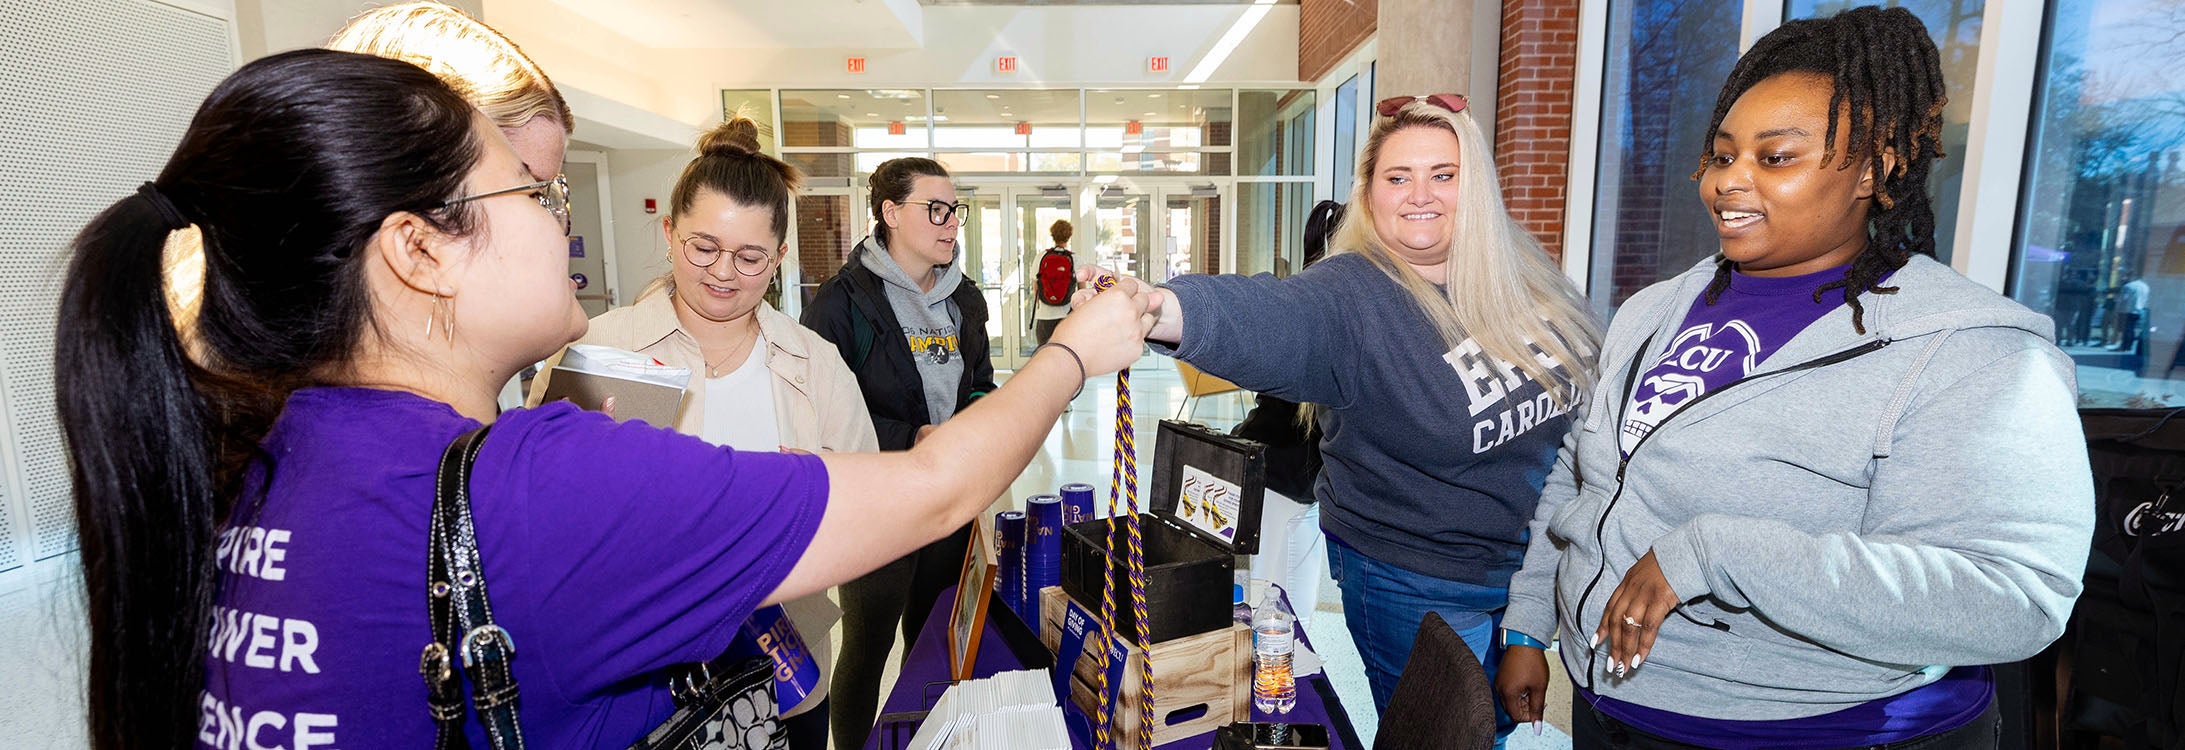 Summer Edwards, center, director of university scholarships, and Zenaia Ward, administrative support specialist, participate in Pirate Nation Gives at the Main Campus Student Center at ECU. (Photo by Rhett Butler)